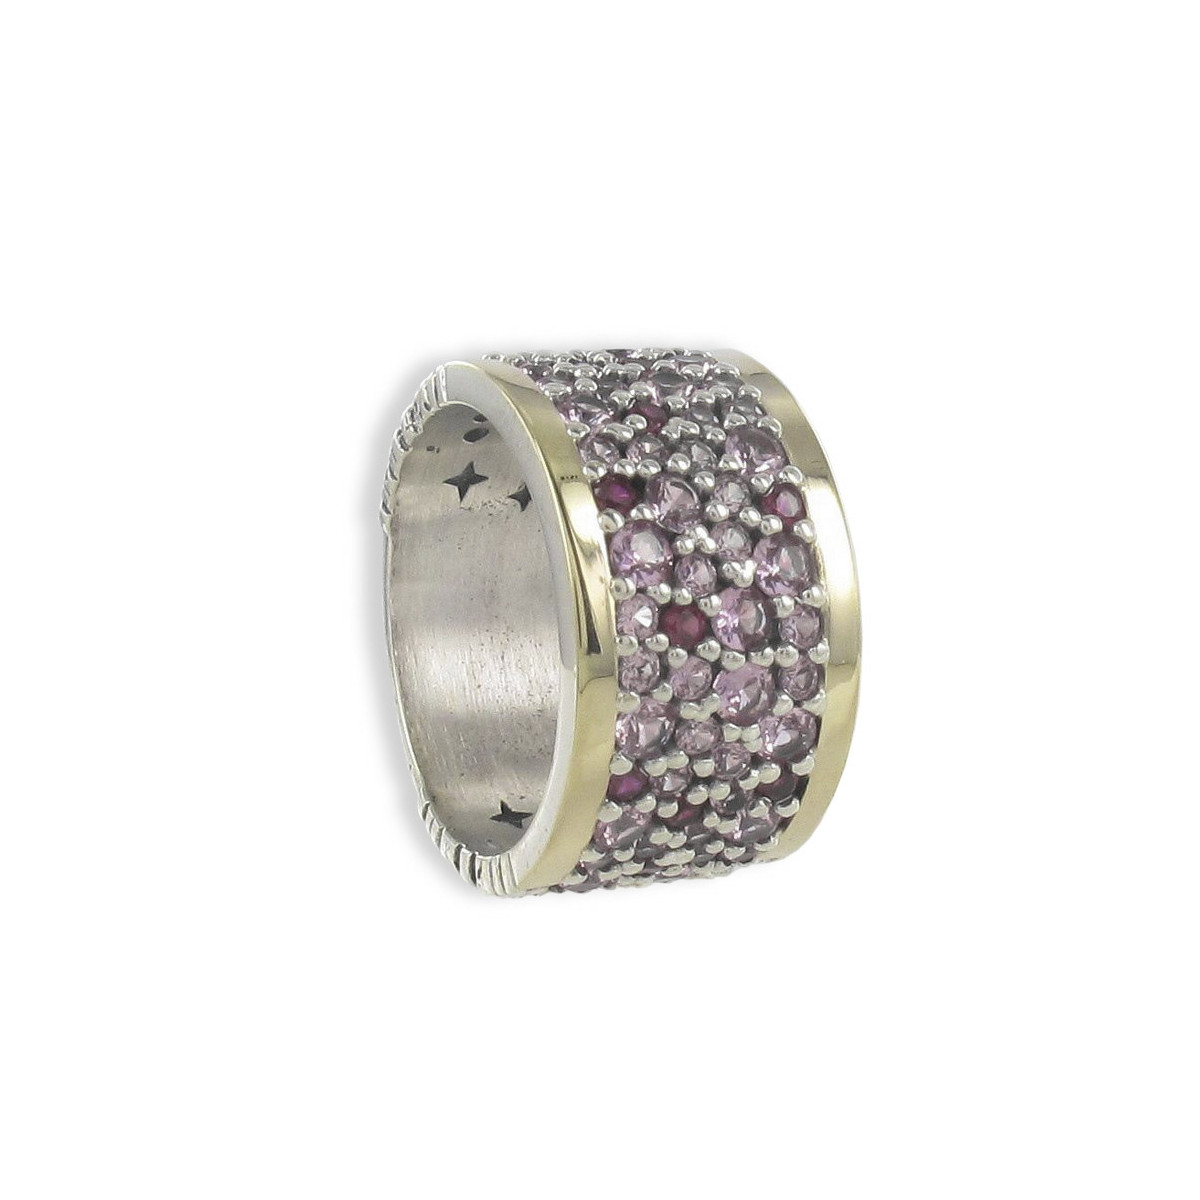 WIDE PAVÉ RING WITH PINK STONES